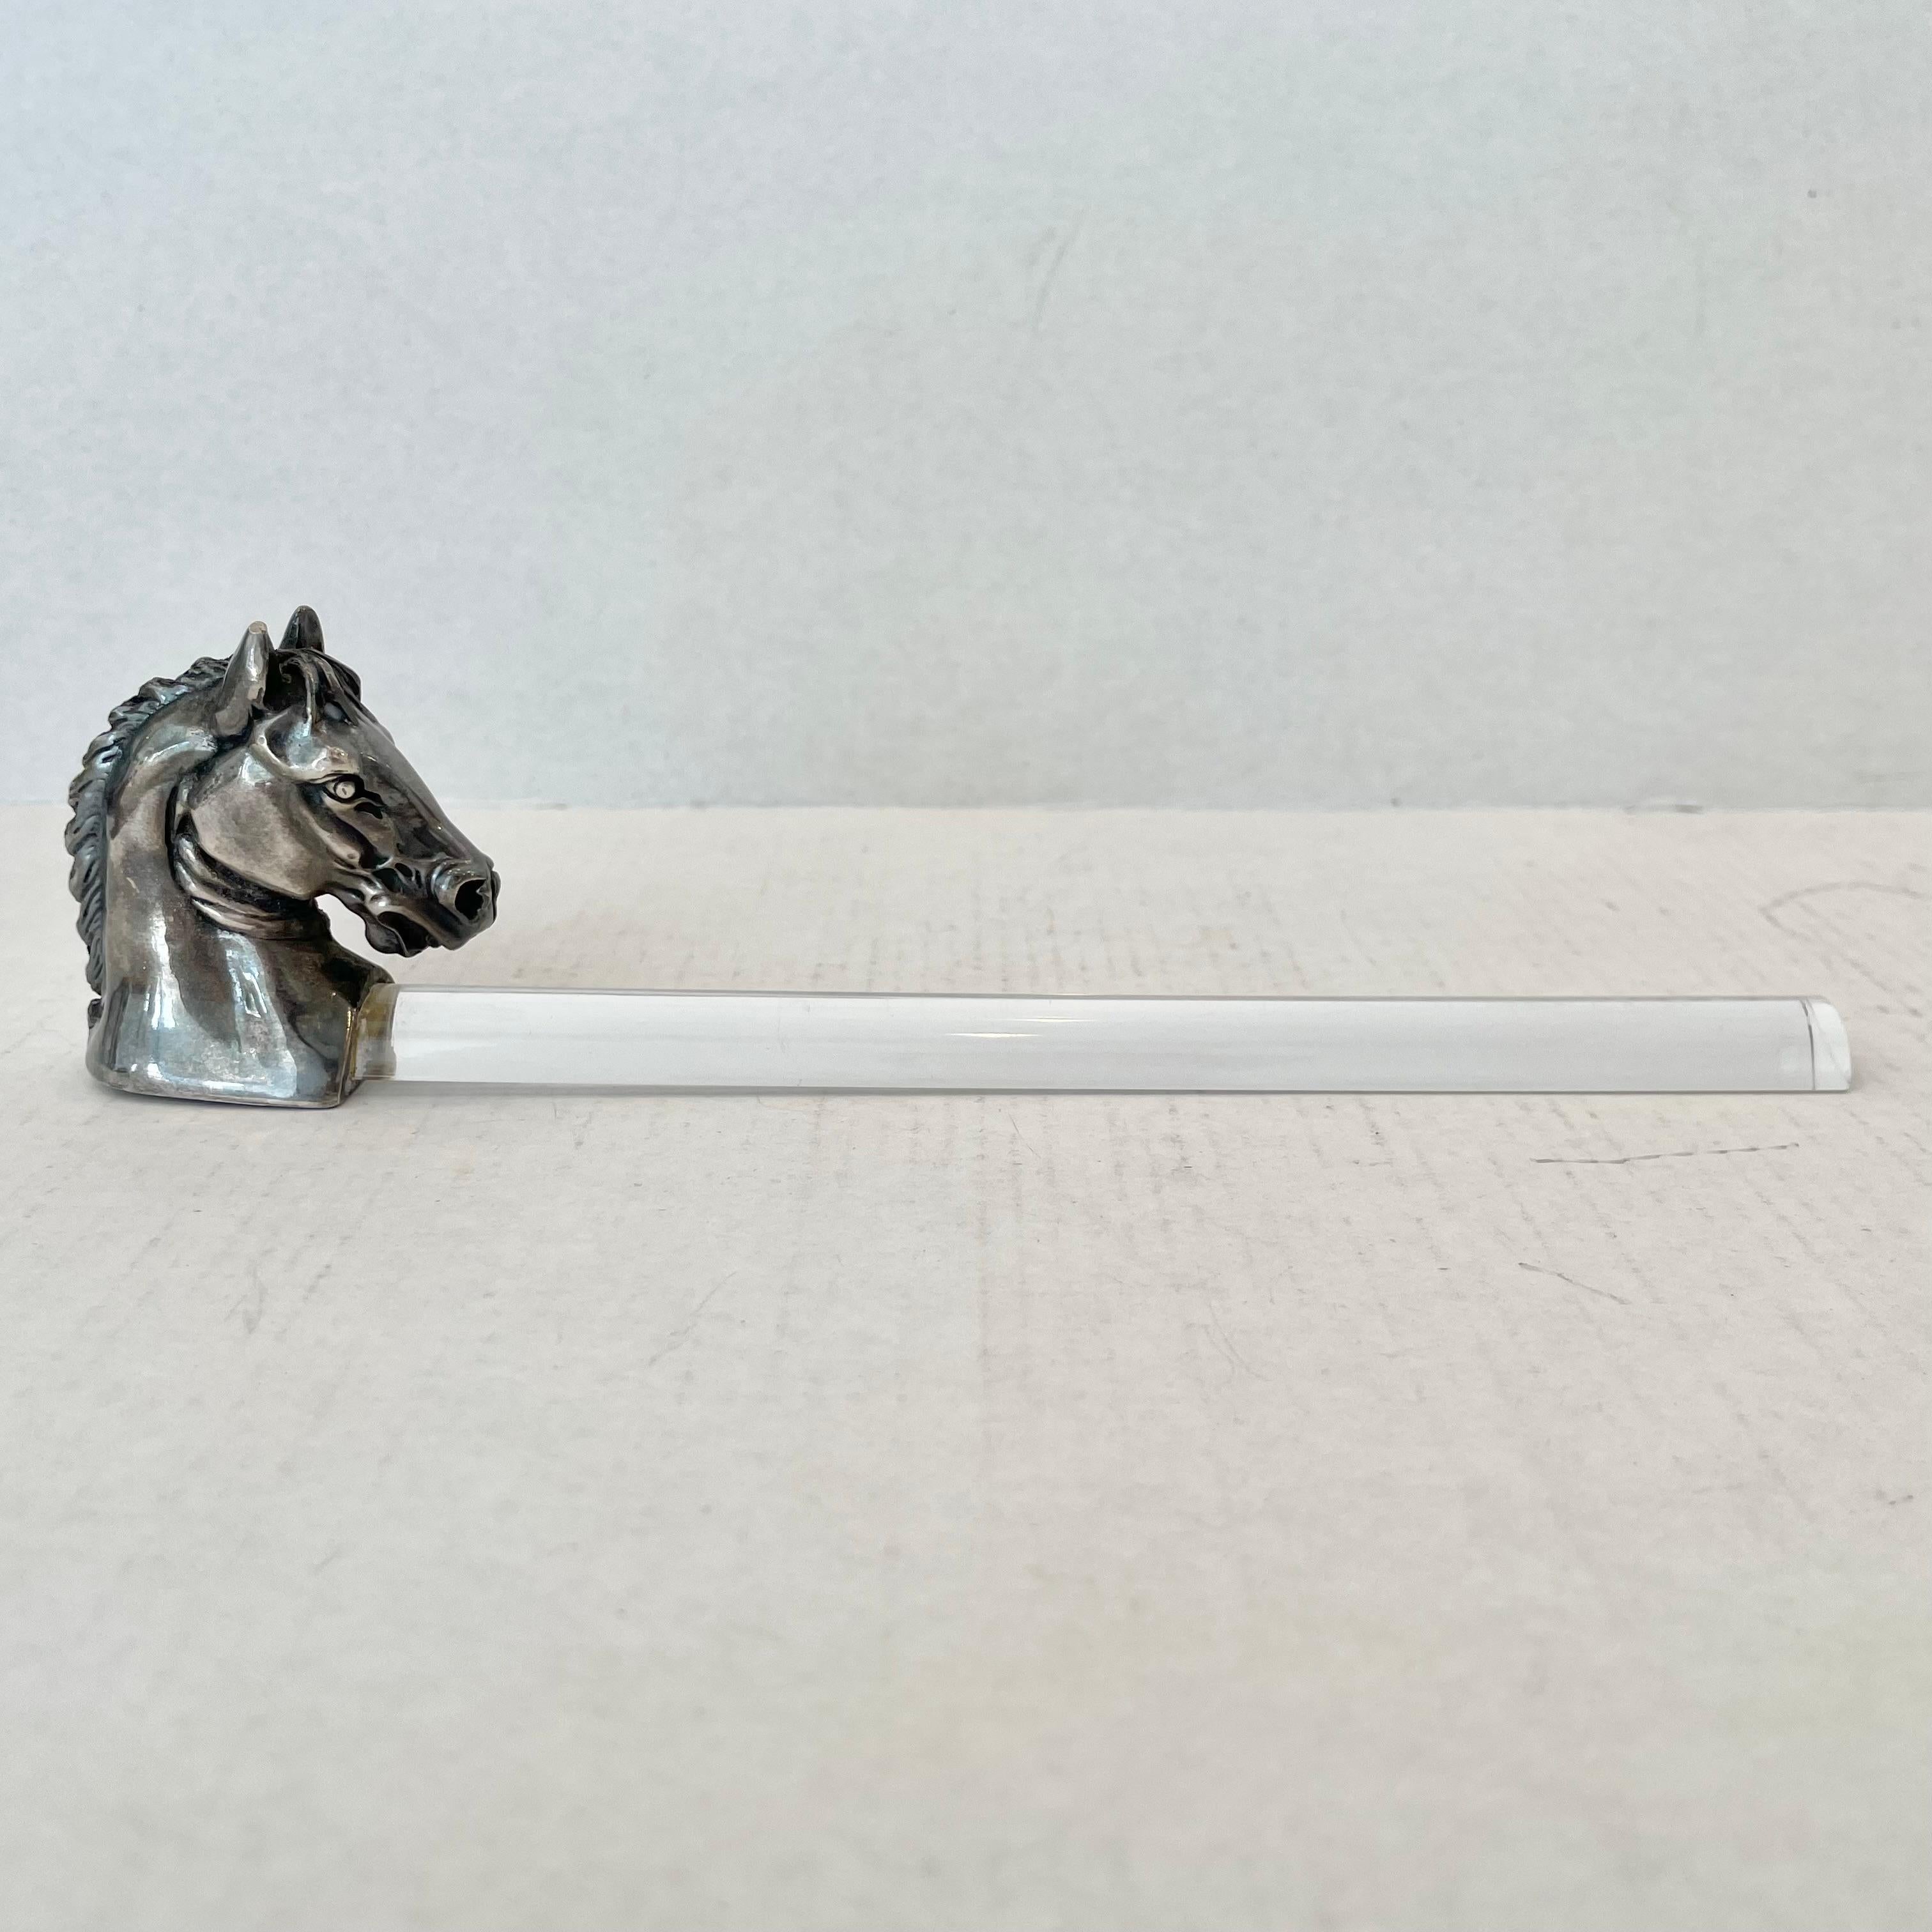 Great Reed & Barton page magnifier with a detailed horse head handle in solid silver plated metal. Reed & Barton 275 stamped on the base of the handle. Elegant patina to the silver. Great for reading or seeing in magnification. This piece is a